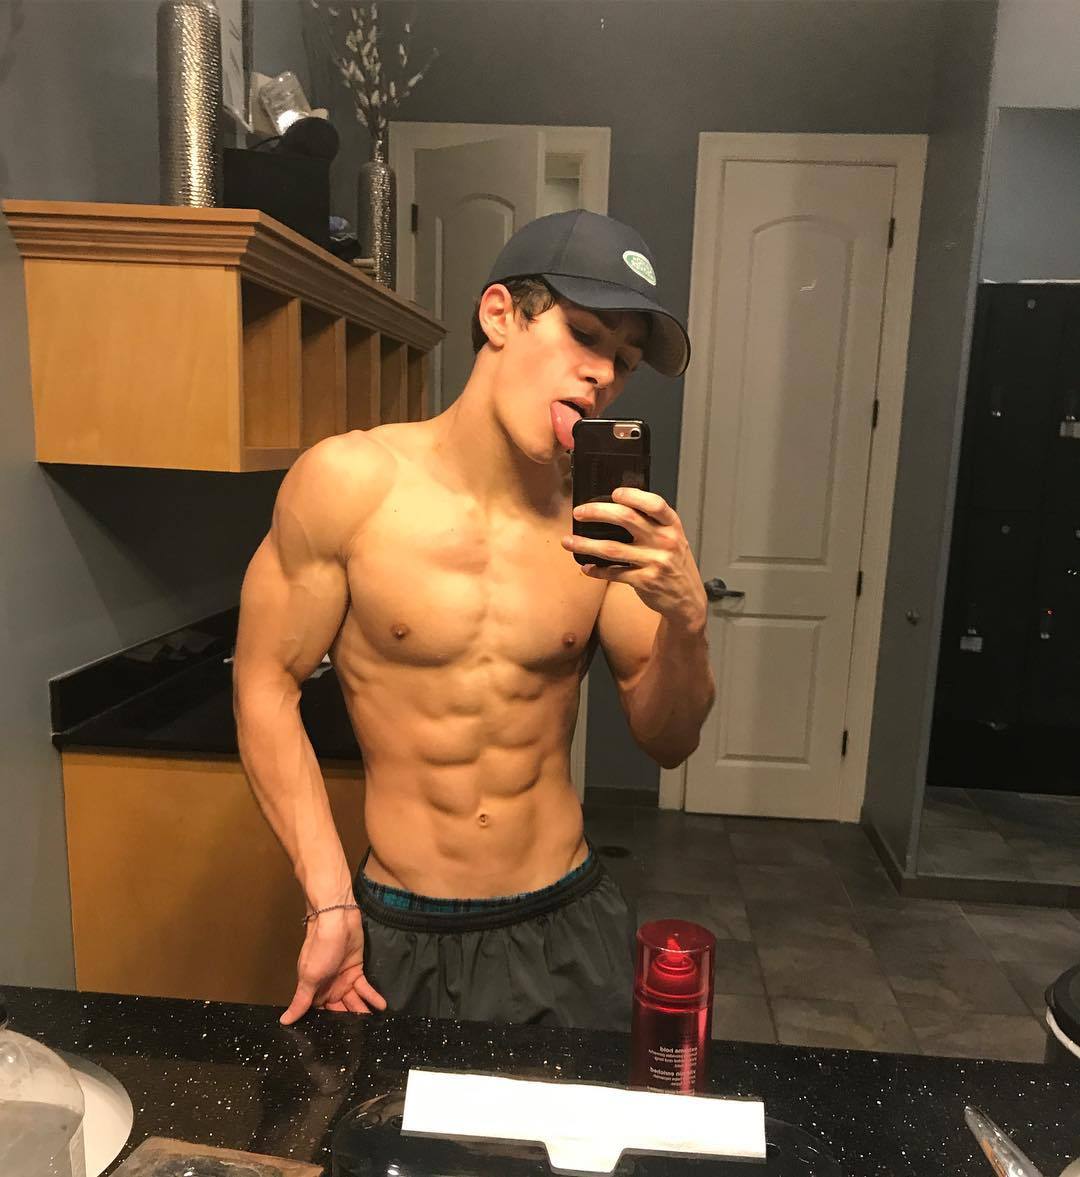 sexy-fit-teen-frat-bro-shirtless-body-abs-cocky-hot-young-college-hunk-straight-baited-selfie